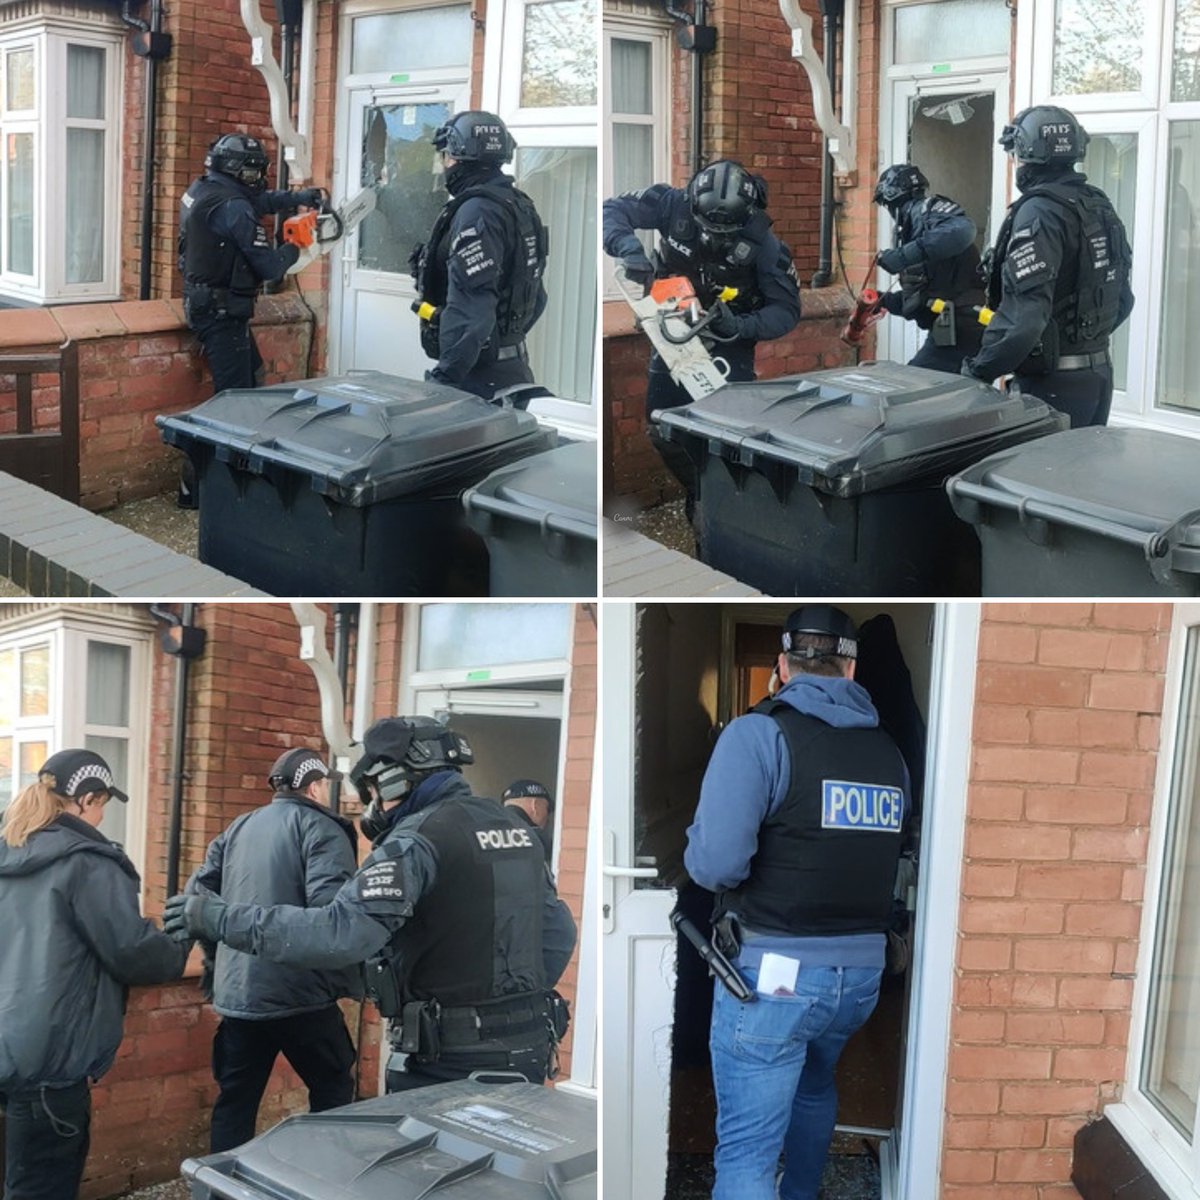 Three warrants linked to drug dealing were executed in Redditch this morning after community concerns over drugs supply. Officers targeted addresses in Archer Road, Beoley Road East and Other Road making one arrest and recovering £10k cash. Read more ➡️ orlo.uk/WZq69